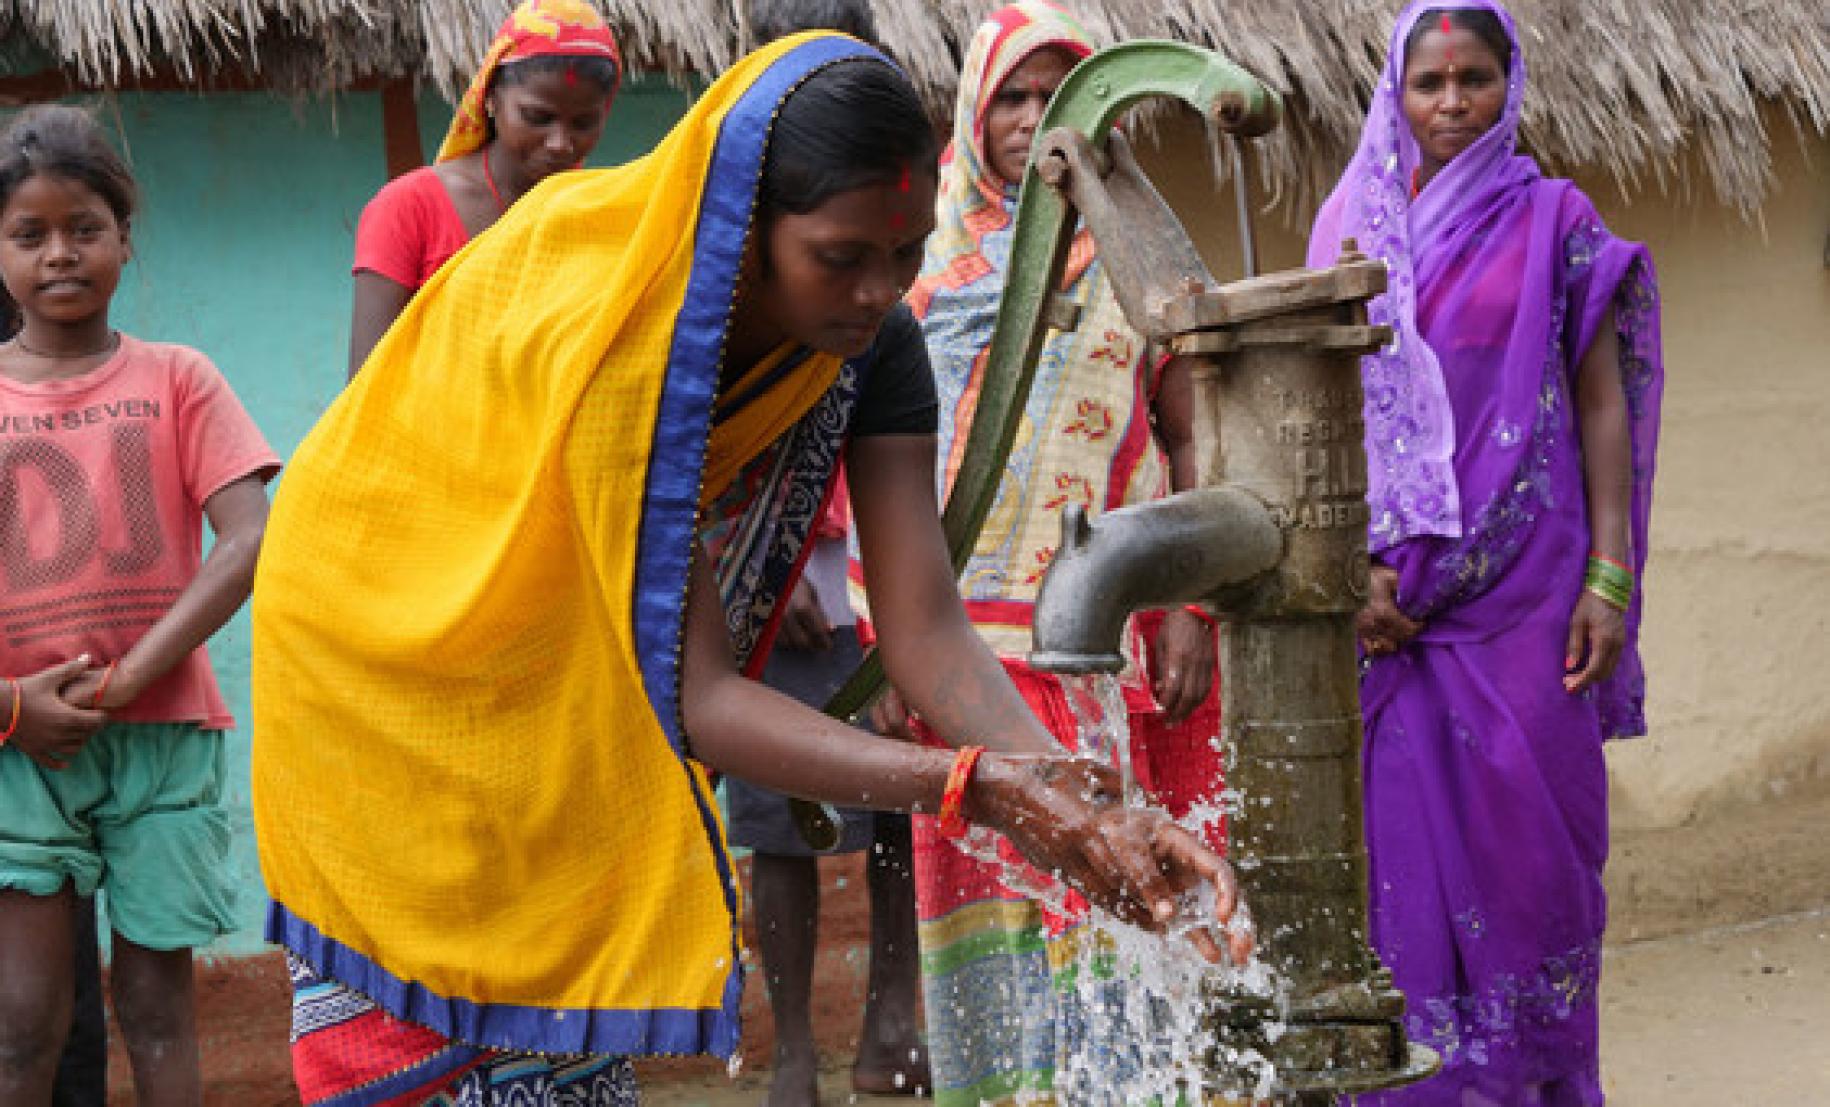 The embed image shows women and girls at a water pump washing their hands. 